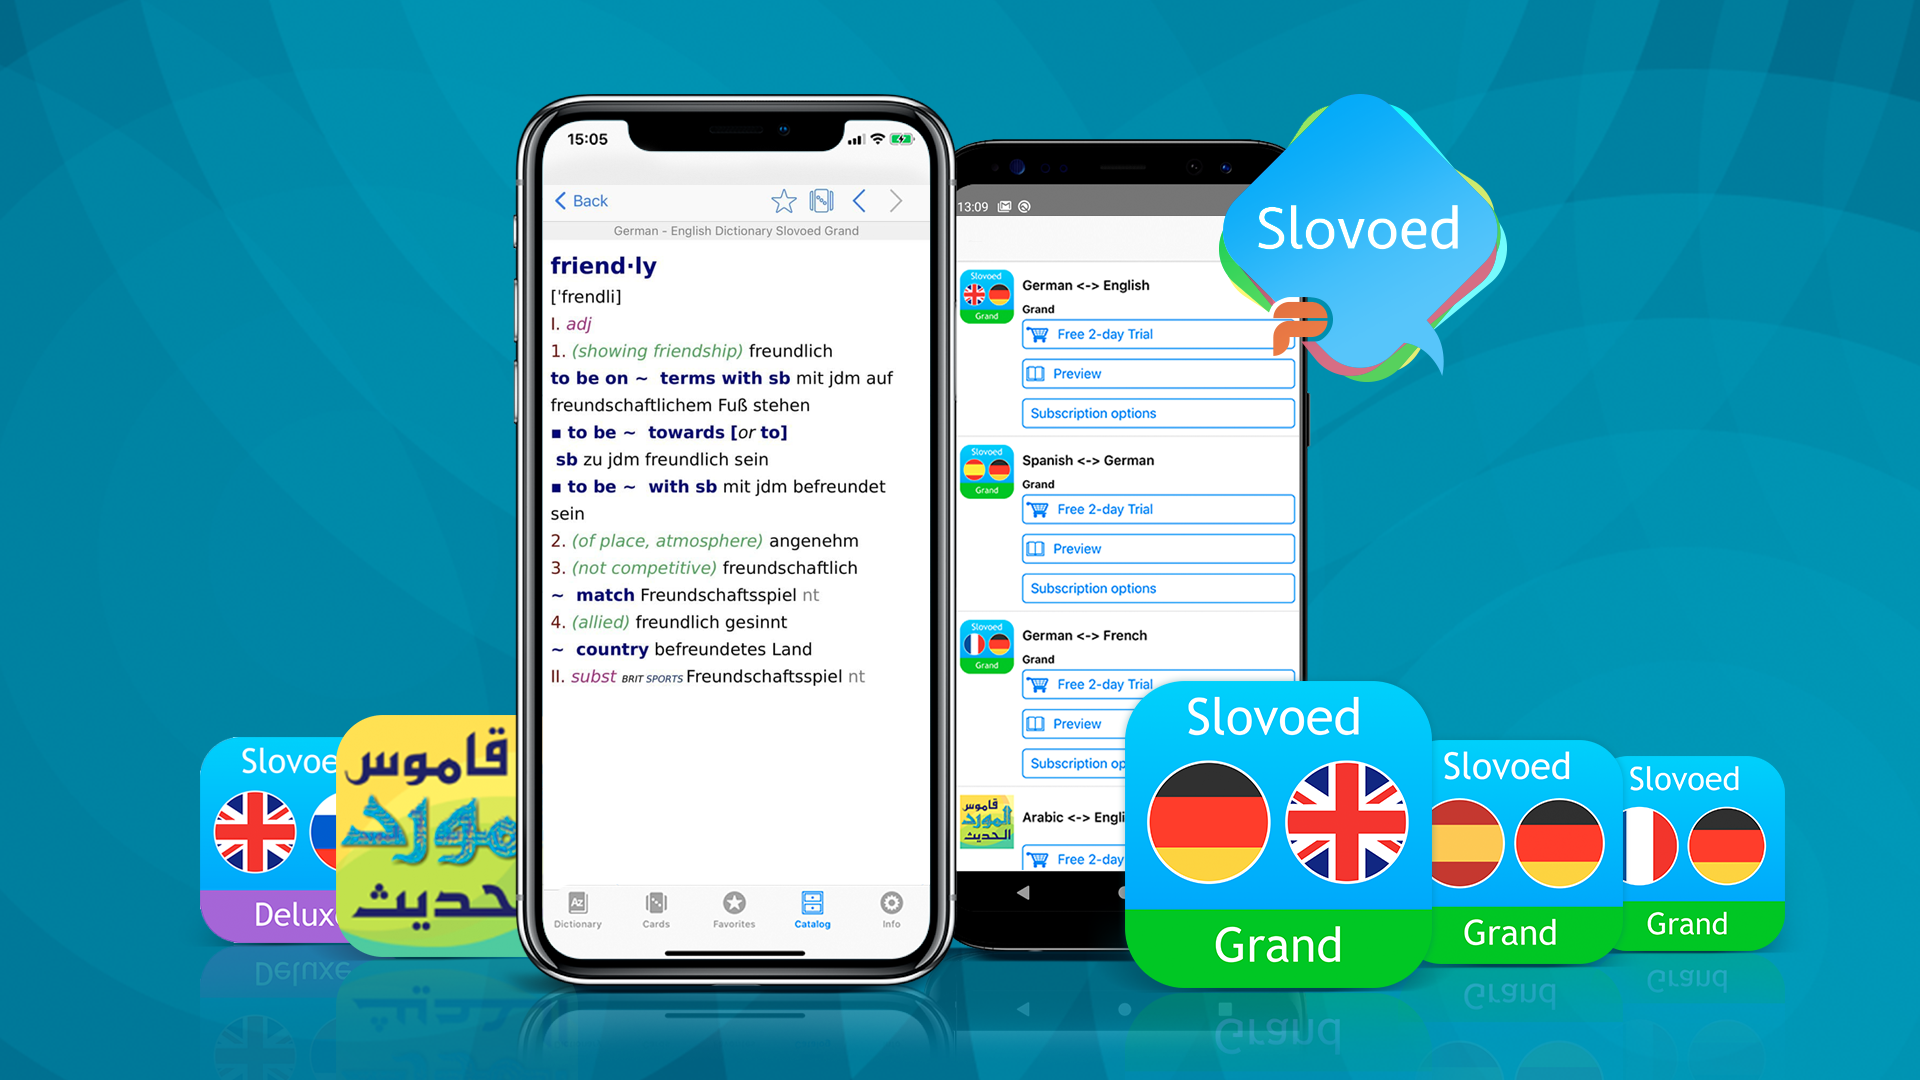 Access top-content dictionaries in one app